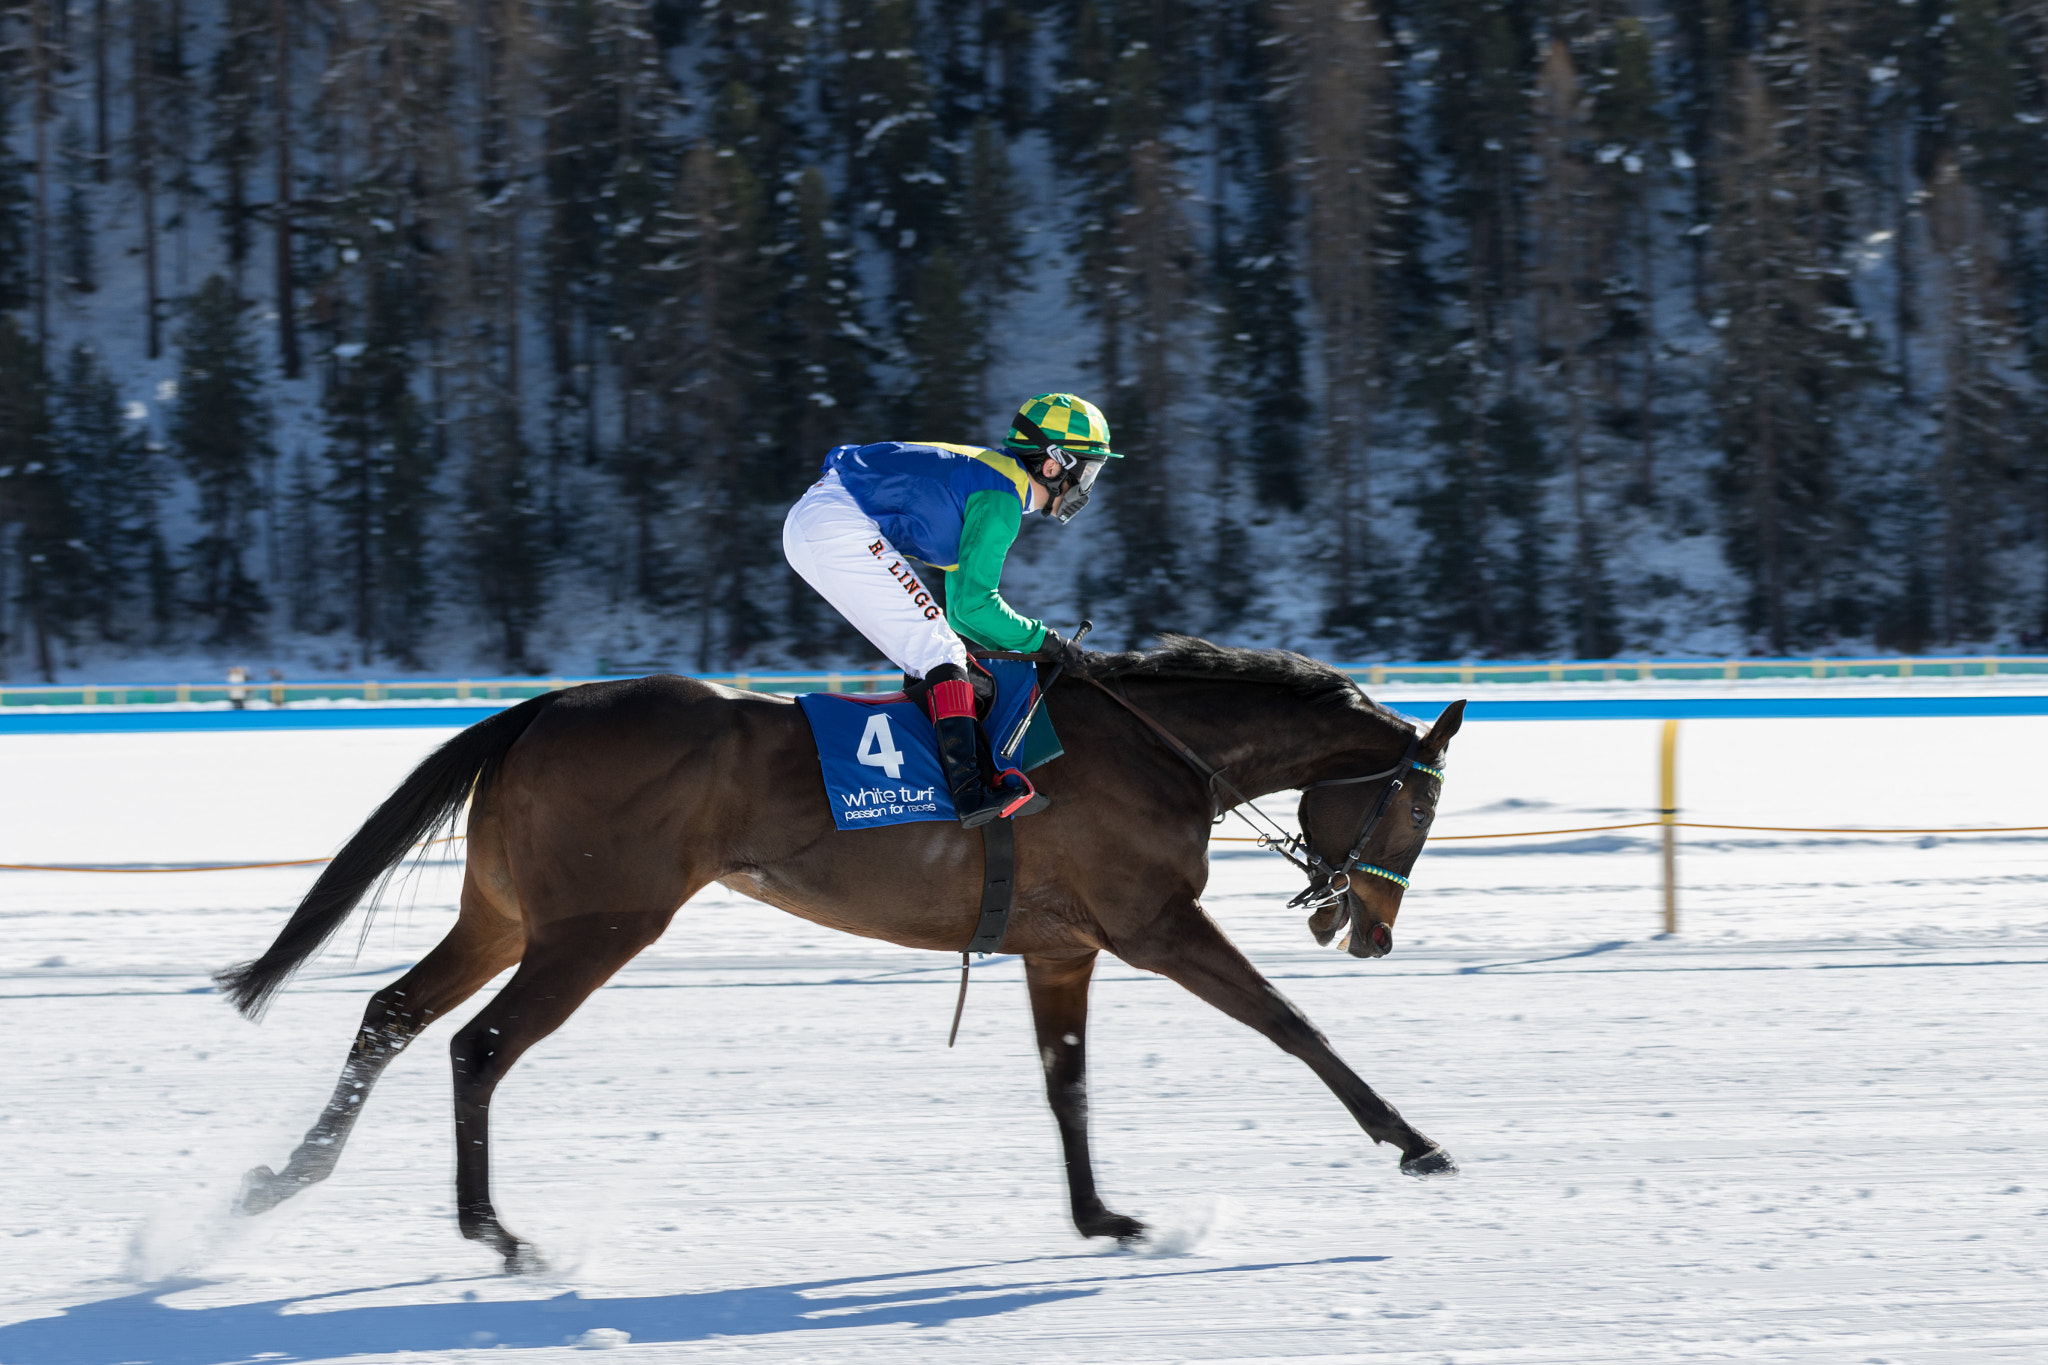 Canon EOS 7D Mark II + Tamron SP 35mm F1.8 Di VC USD sample photo. Warmup for white turf flat race photography